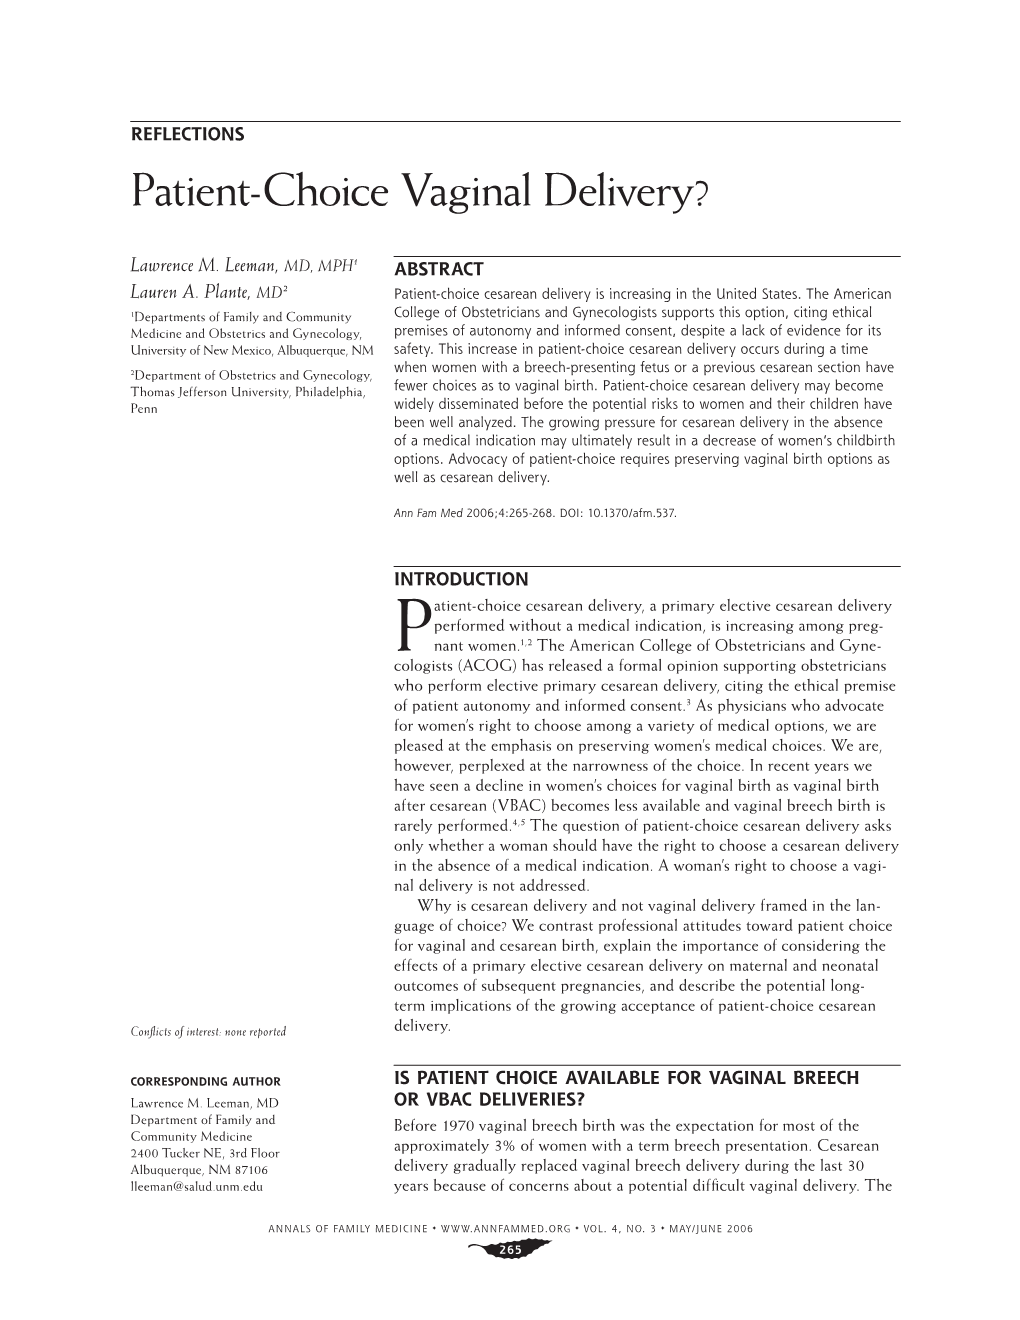 Patient-Choice Vaginal Delivery?